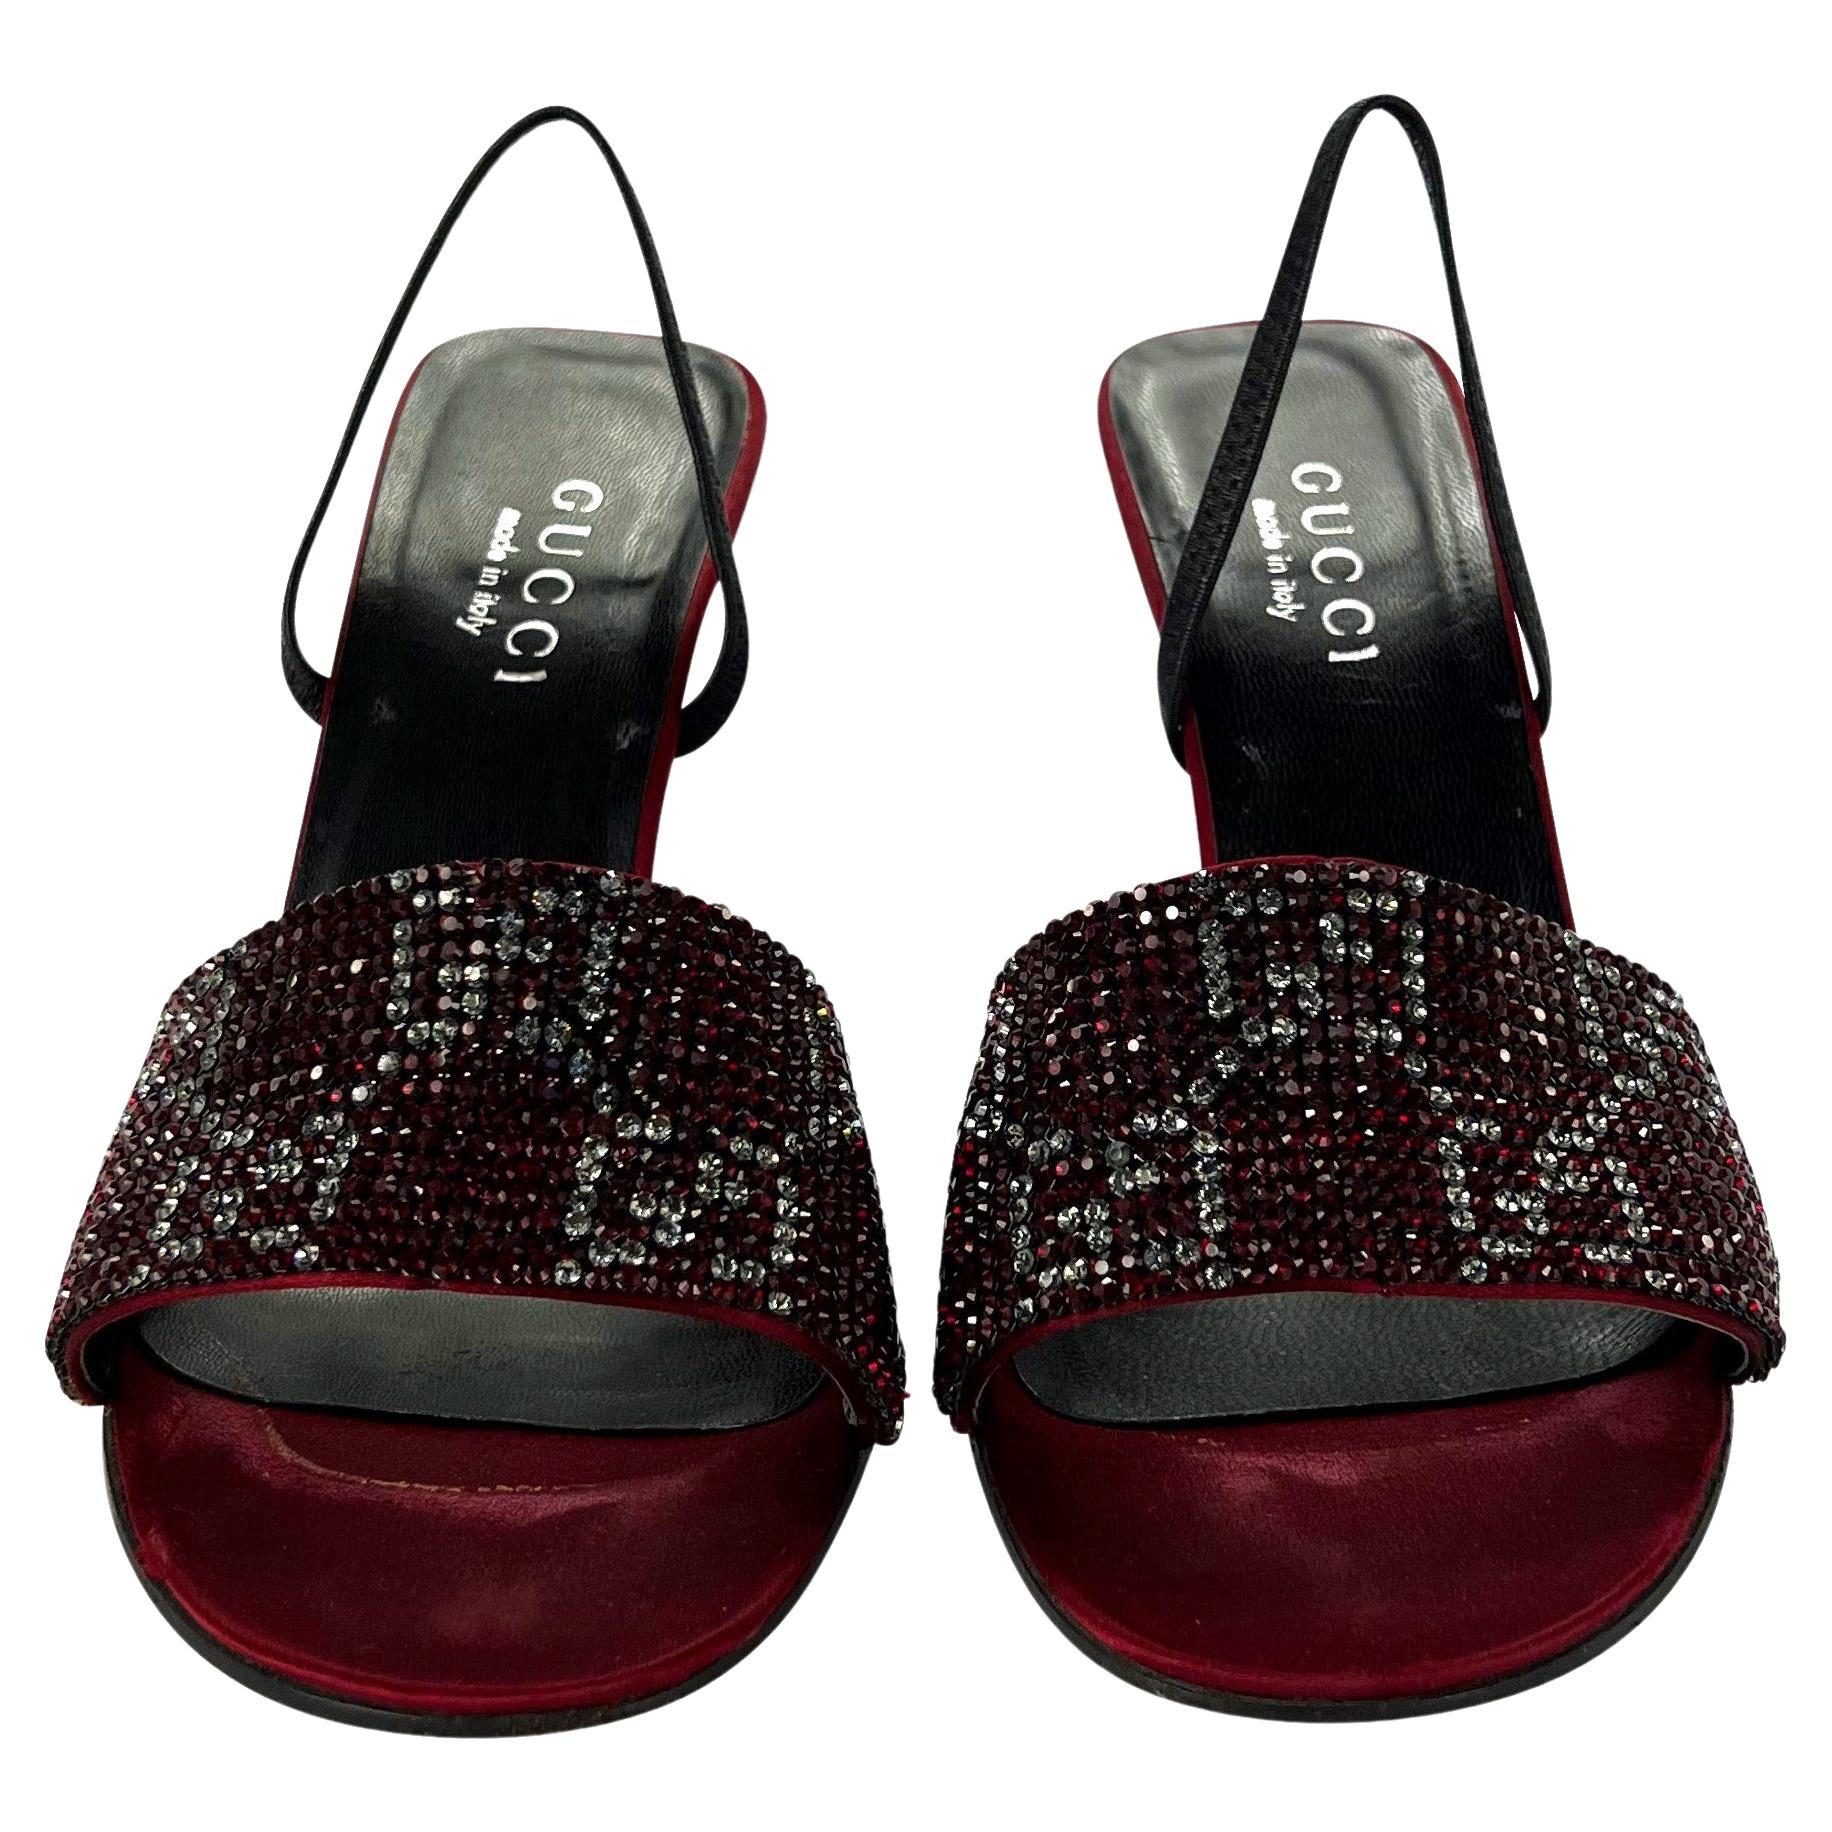 Black S/S 1998 Gucci Tom Ford Red Crystal 'GG' Heels Size 38C For Sale